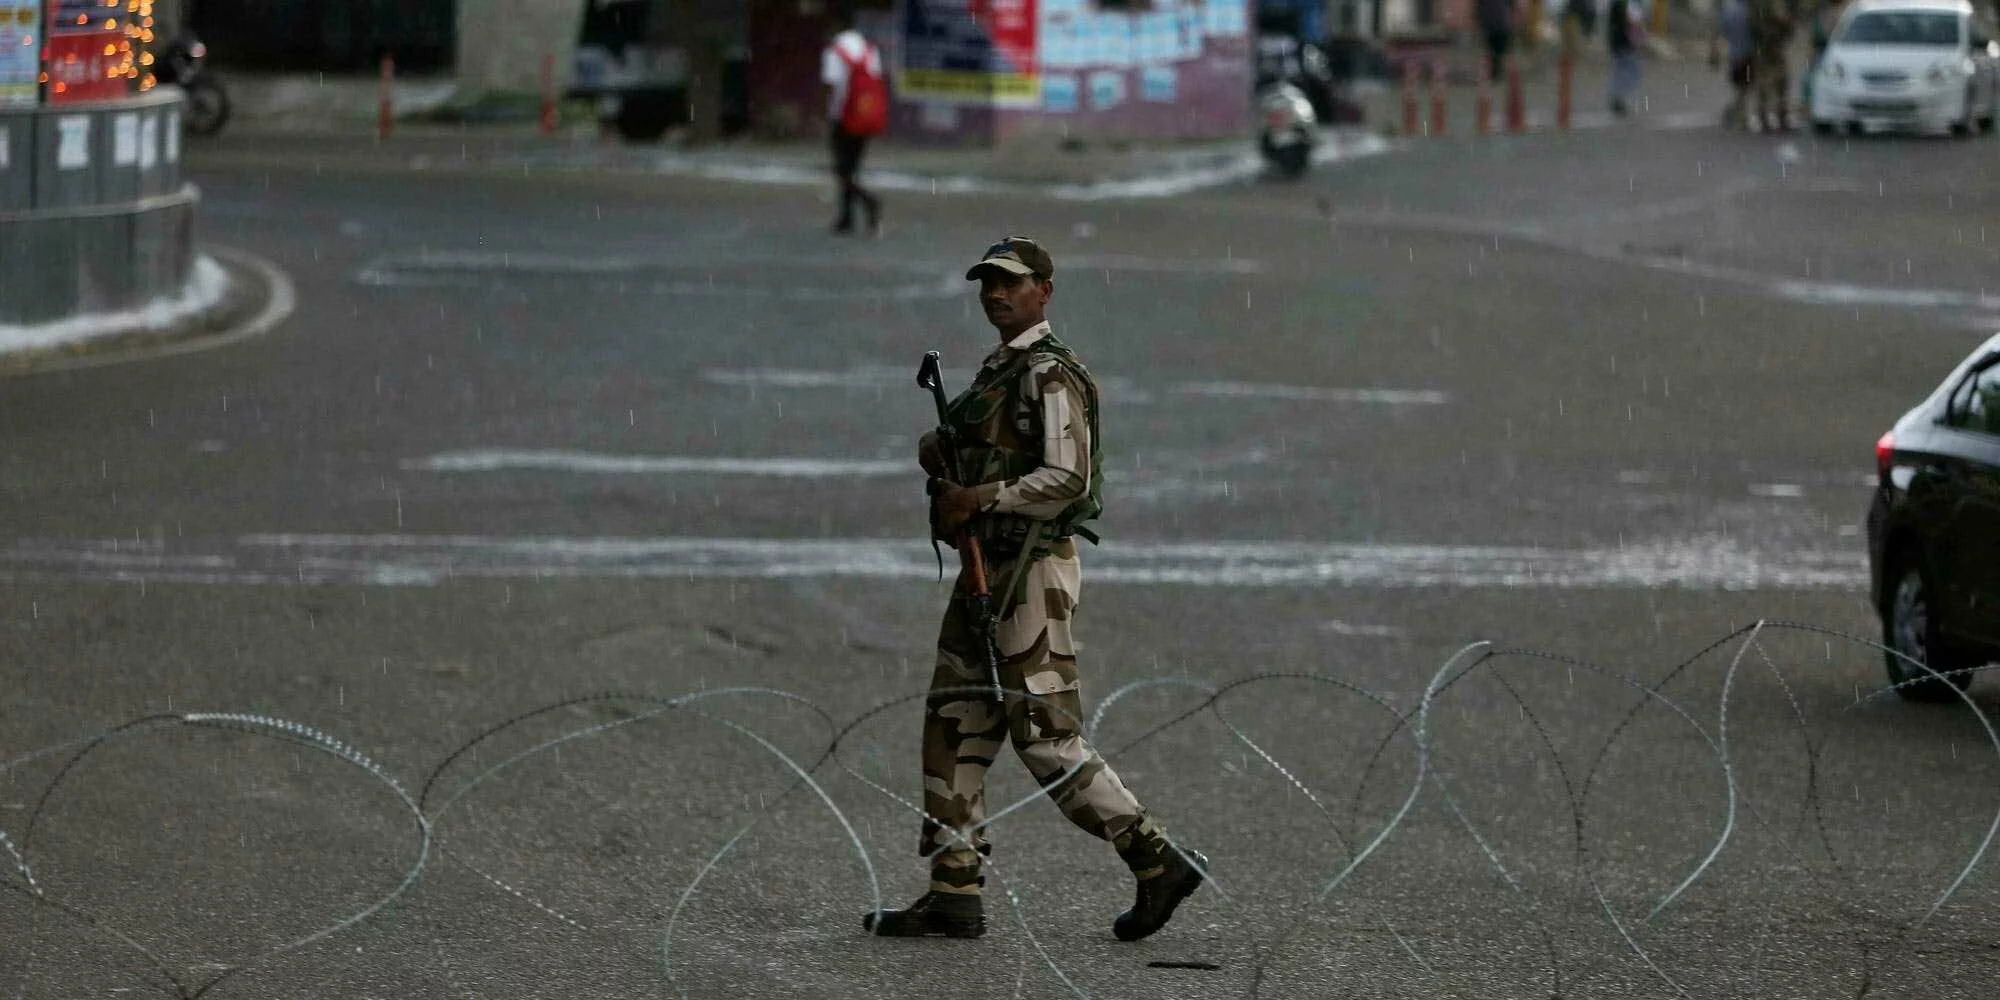 India Moves to Strip Kashmir of Autonomy, Potentially Setting Up Conflict in Disputed Territory